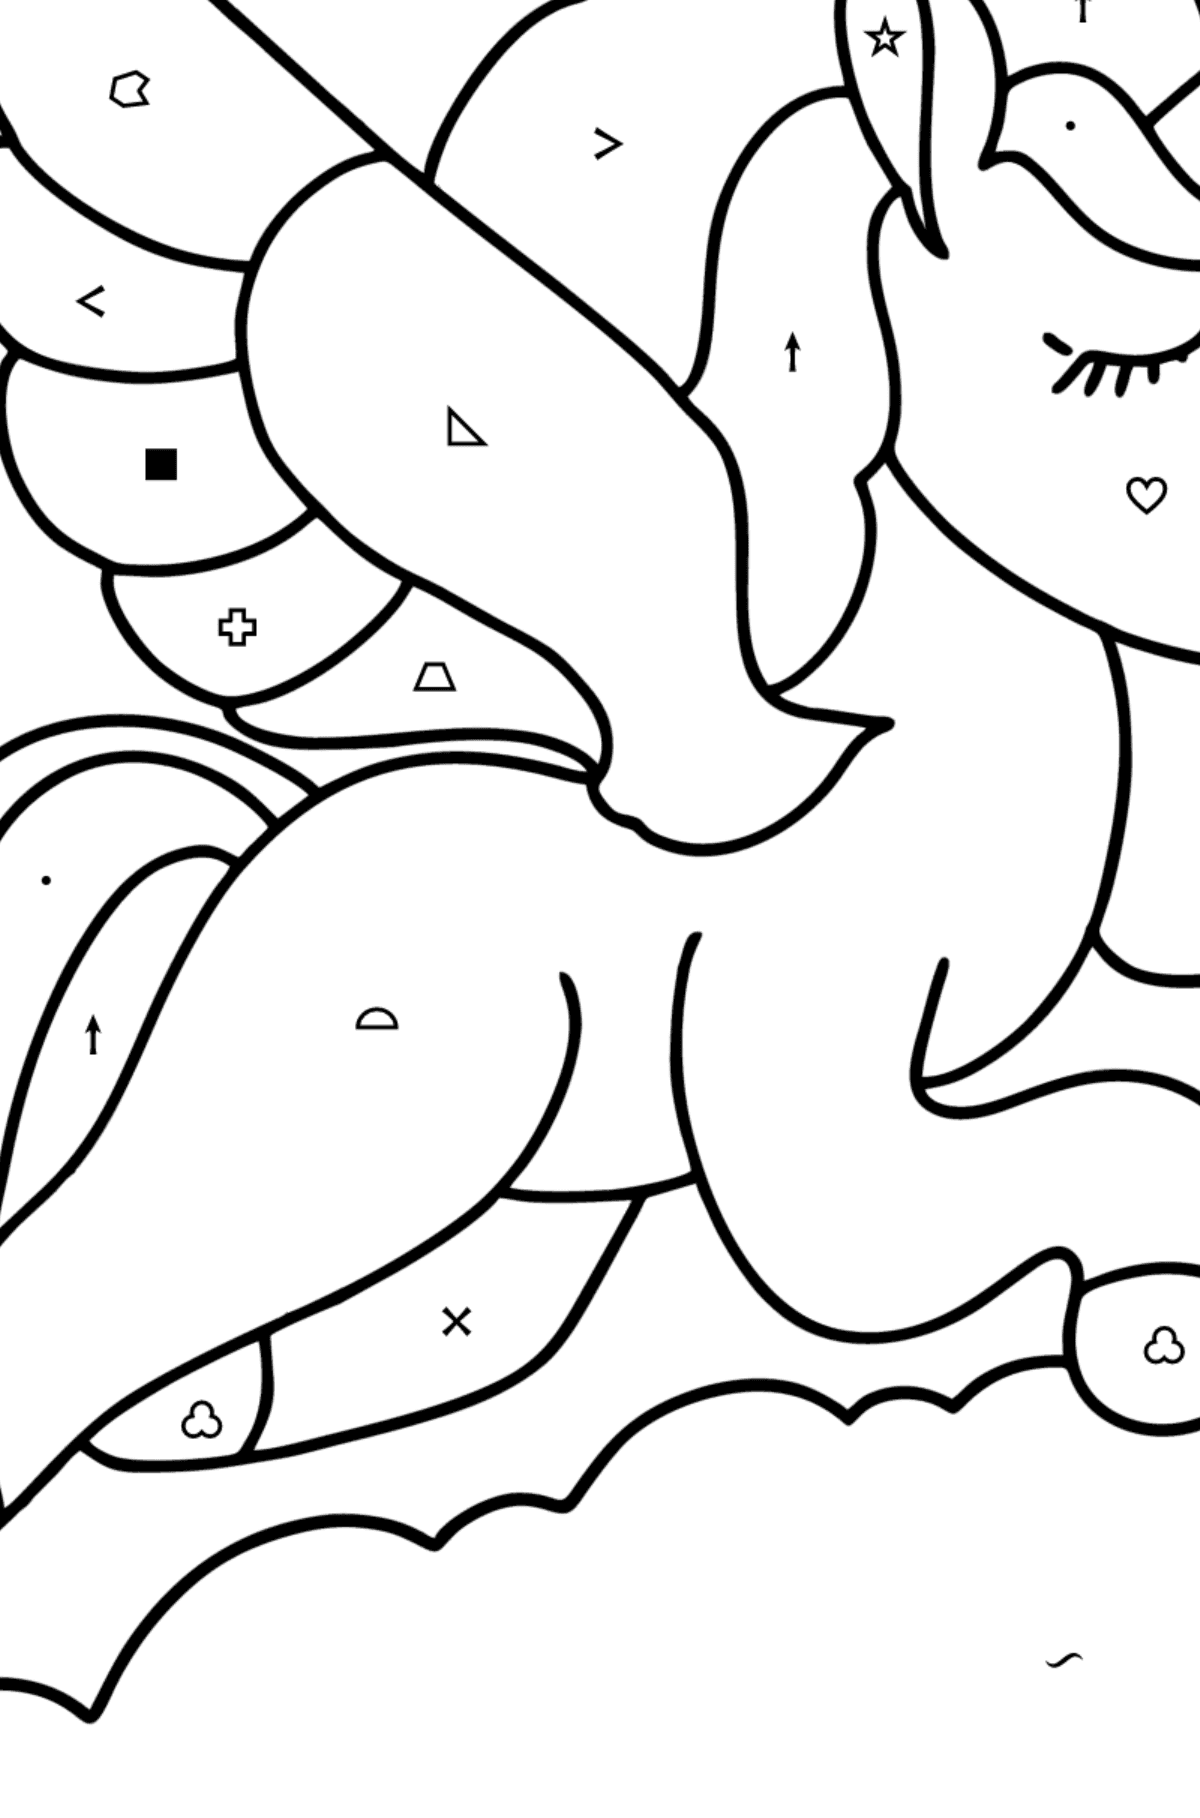 Unicorn with wings coloring page - Coloring by Symbols and Geometric Shapes for Kids